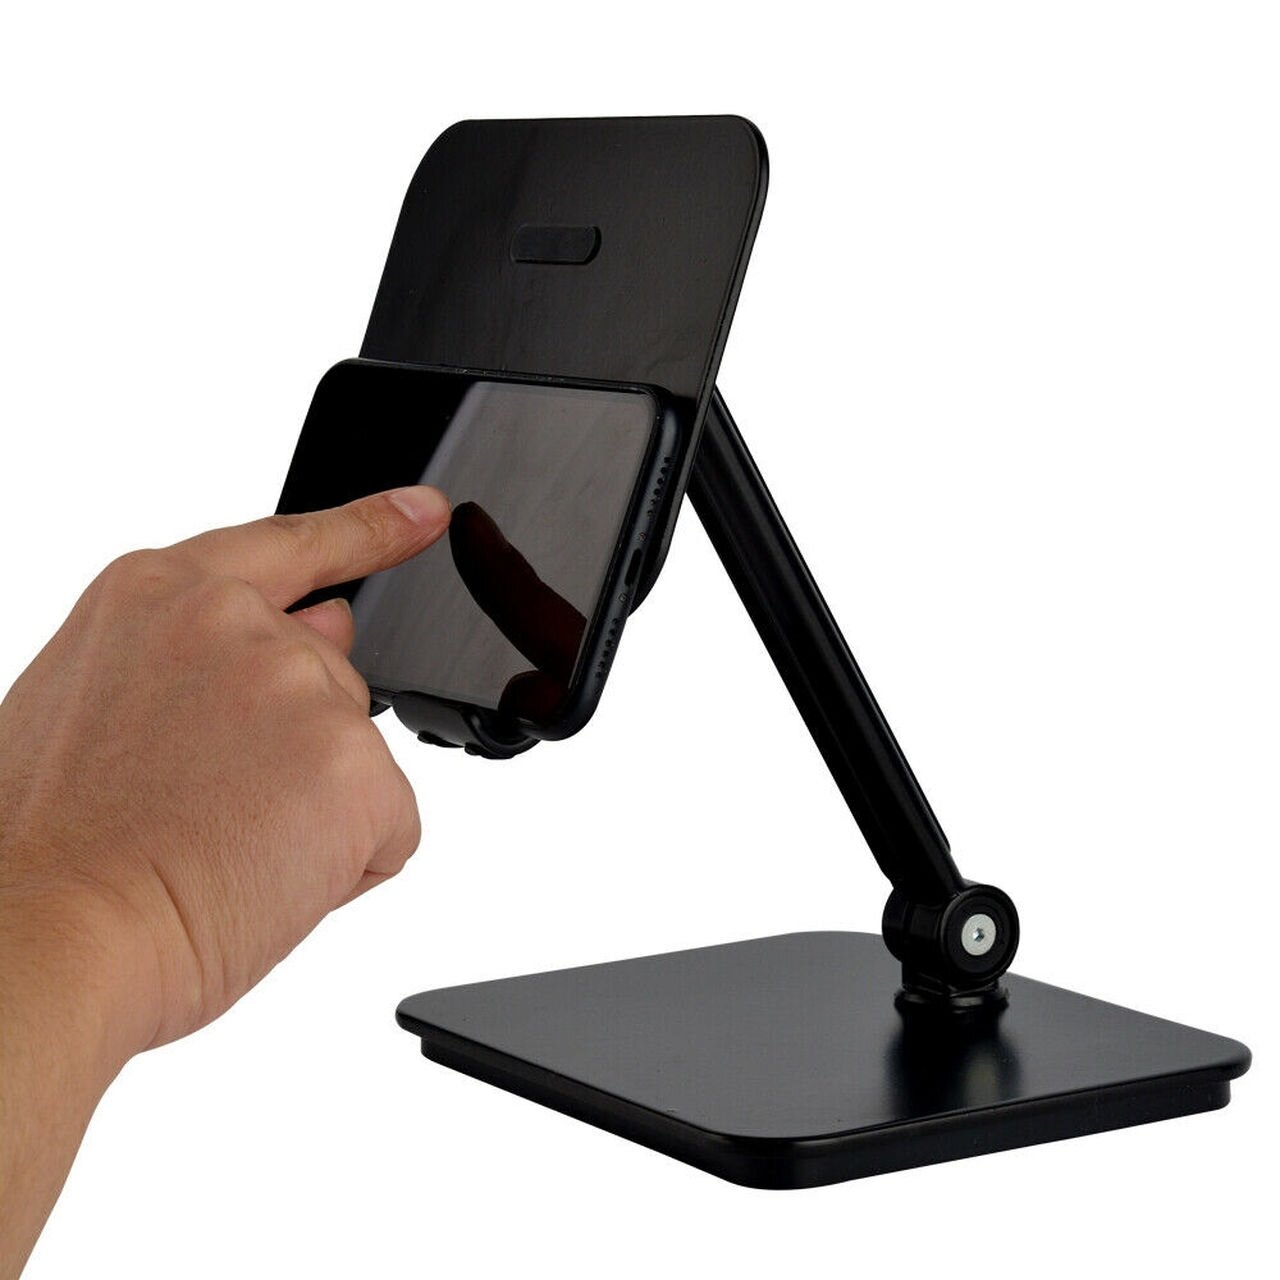 Full Motion 3 in 1 Smartphone Tablet and Notebook Holder Black